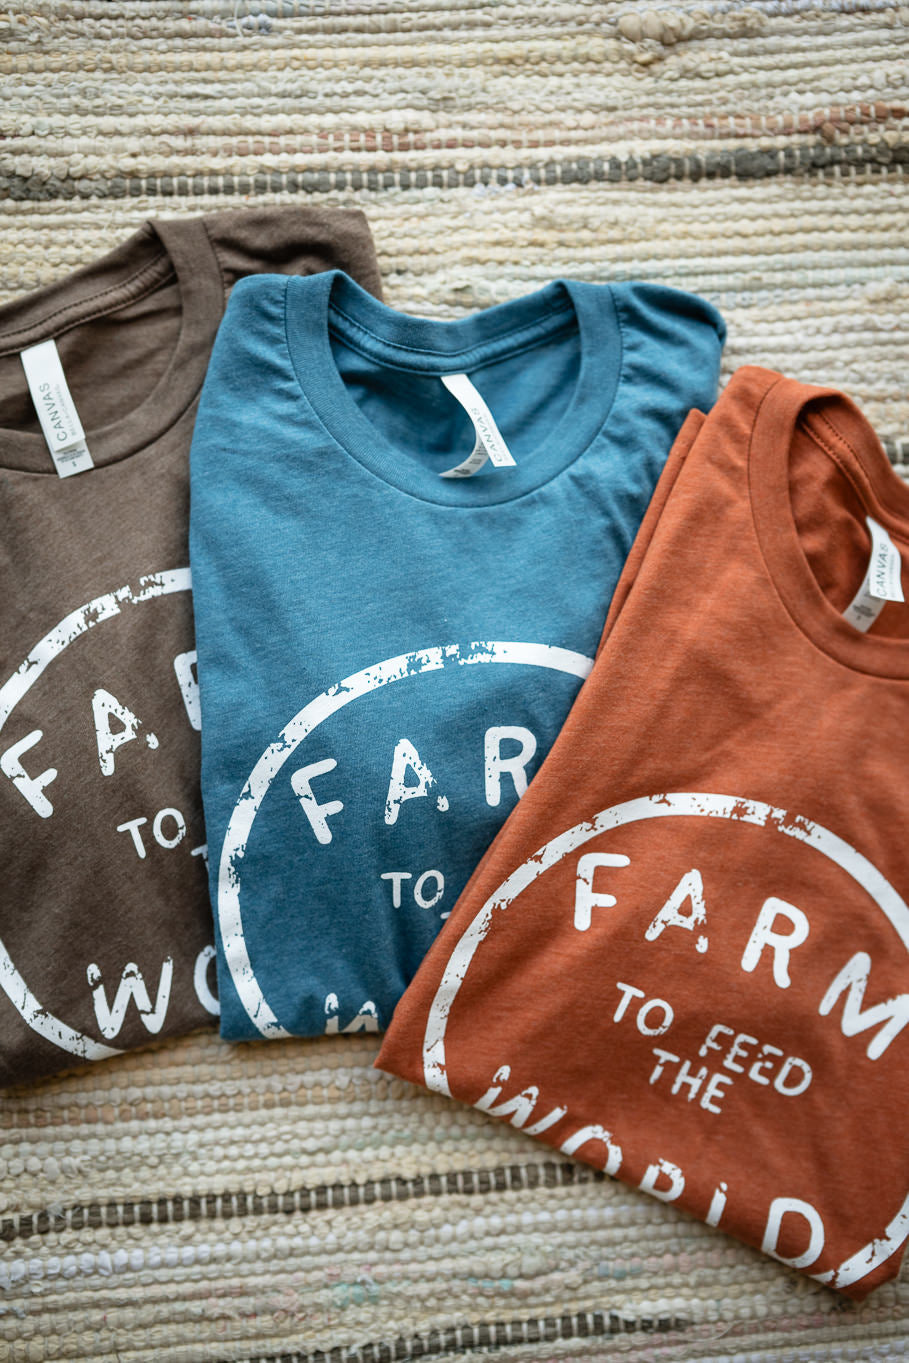 Feed the World Graphic Tee in Heather Brown | Sizes S - 3XL - Rosebud's Tees